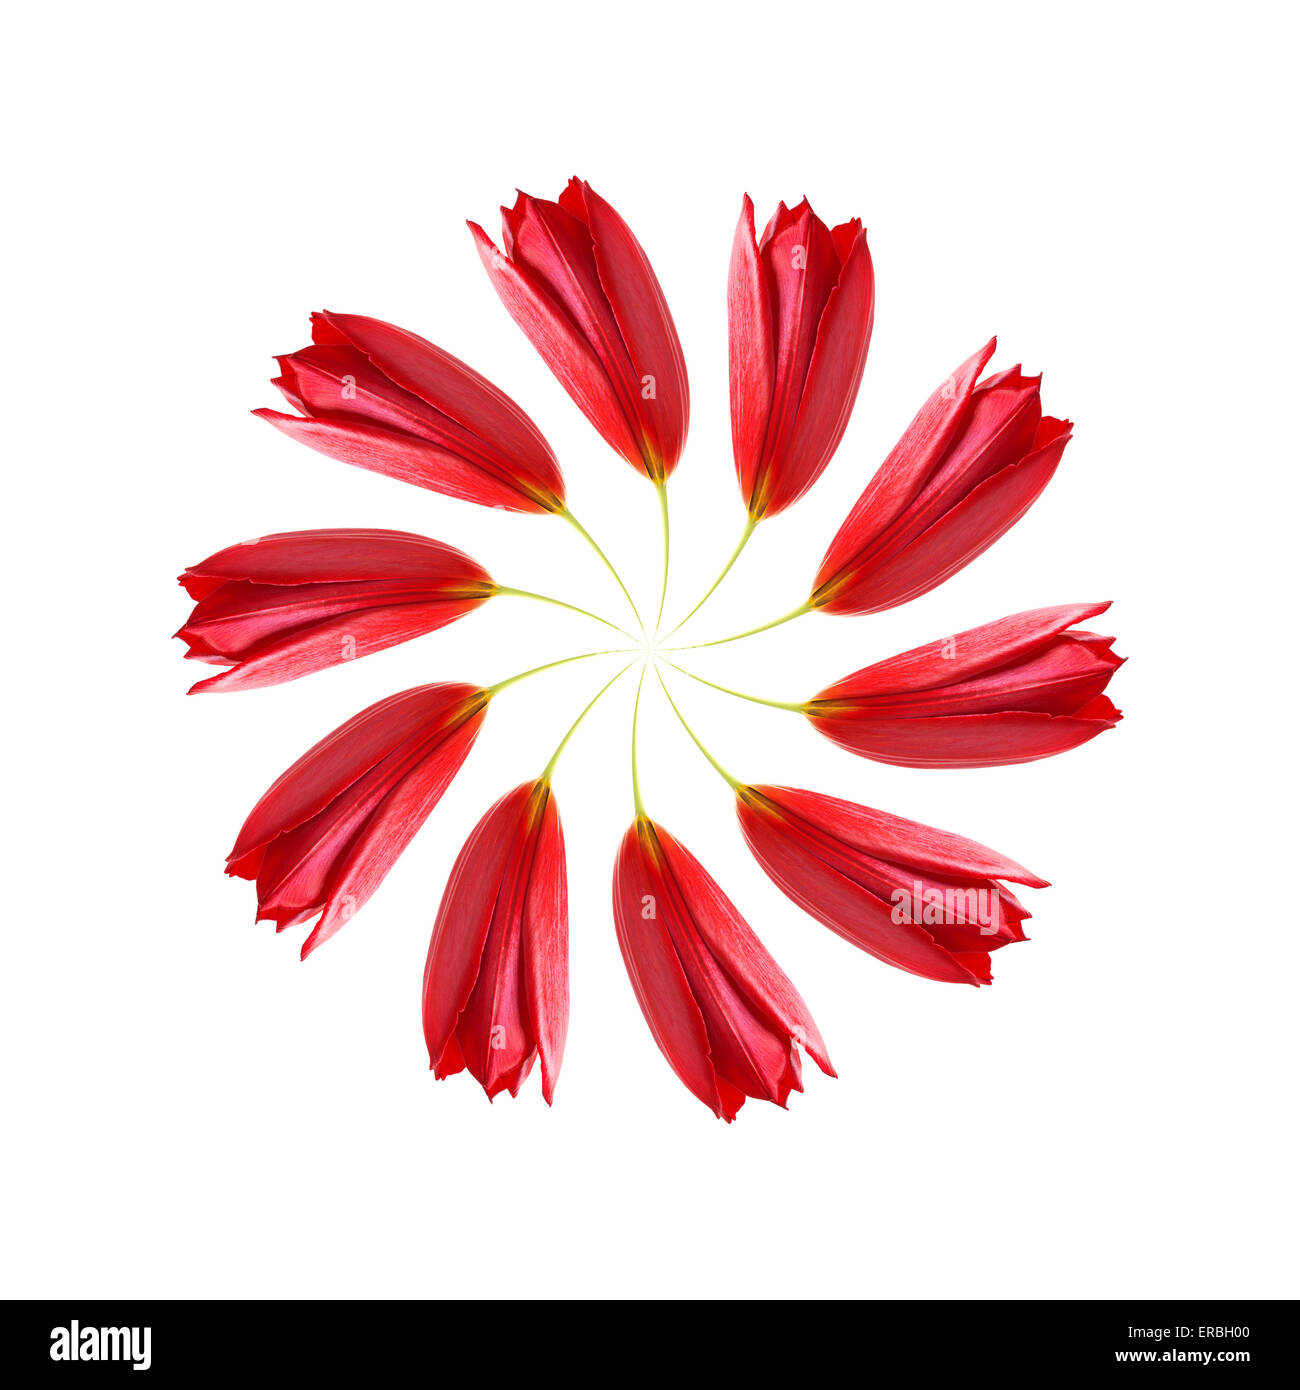 Distorted swirl of red tulips on a white background Stock Photo